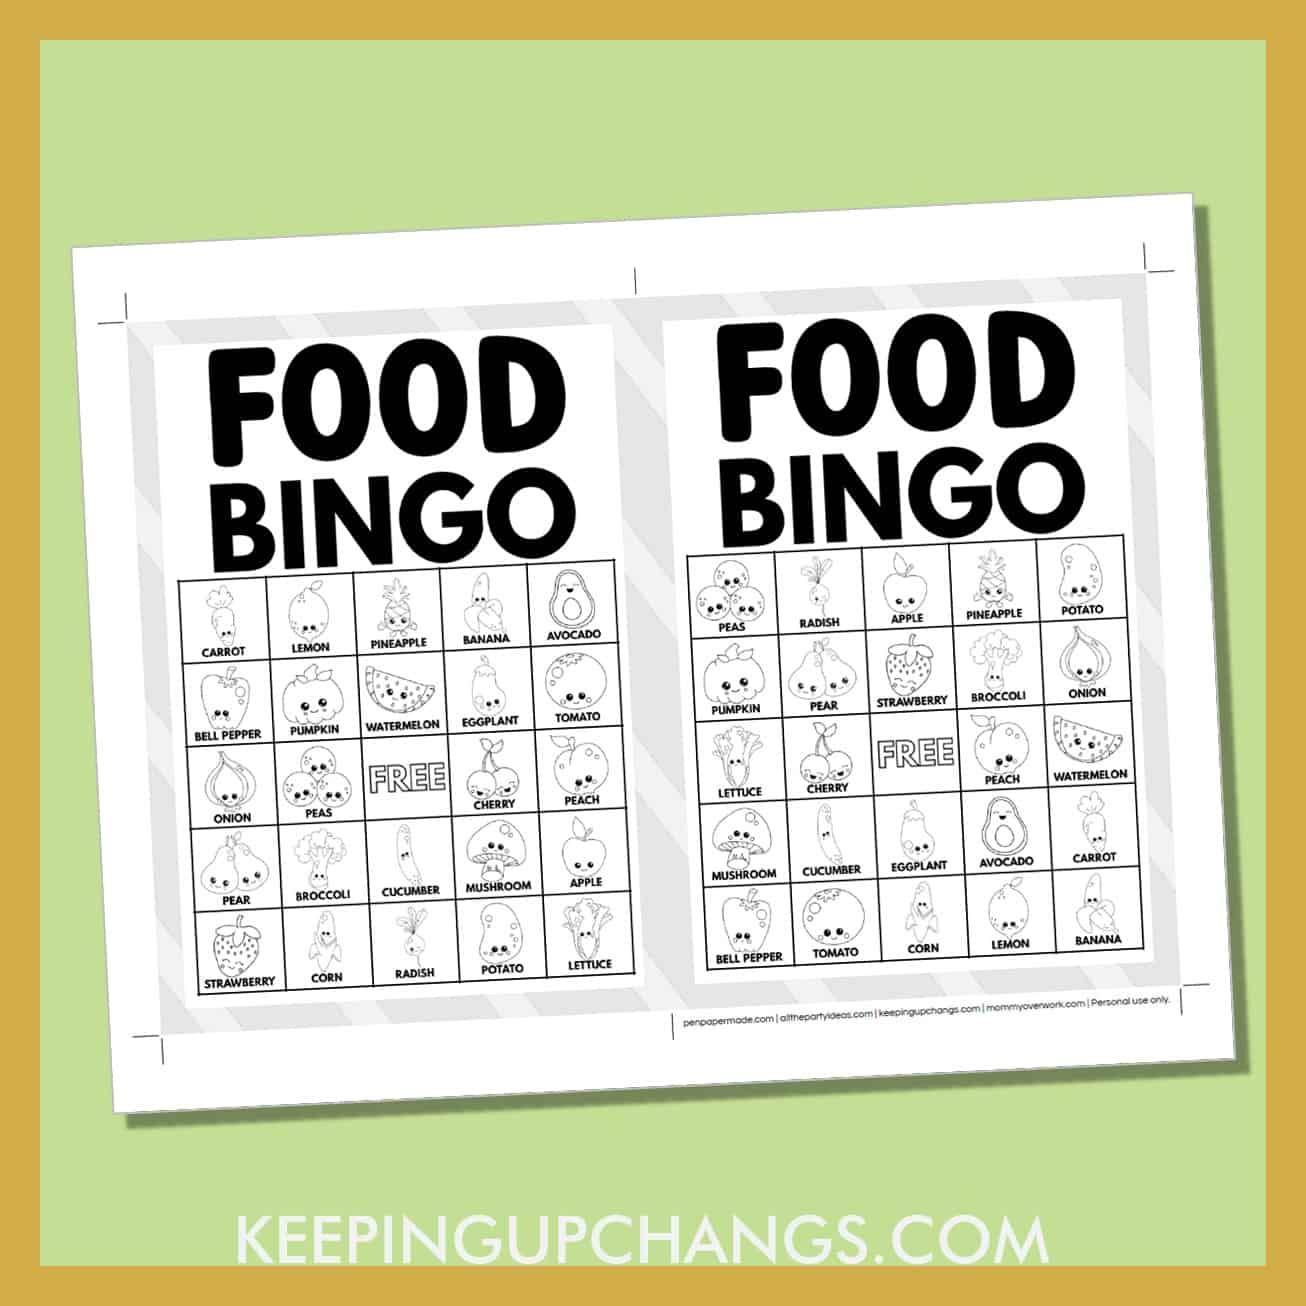 free food bingo card 5x5 5x7 game boards with black, white images and text words.